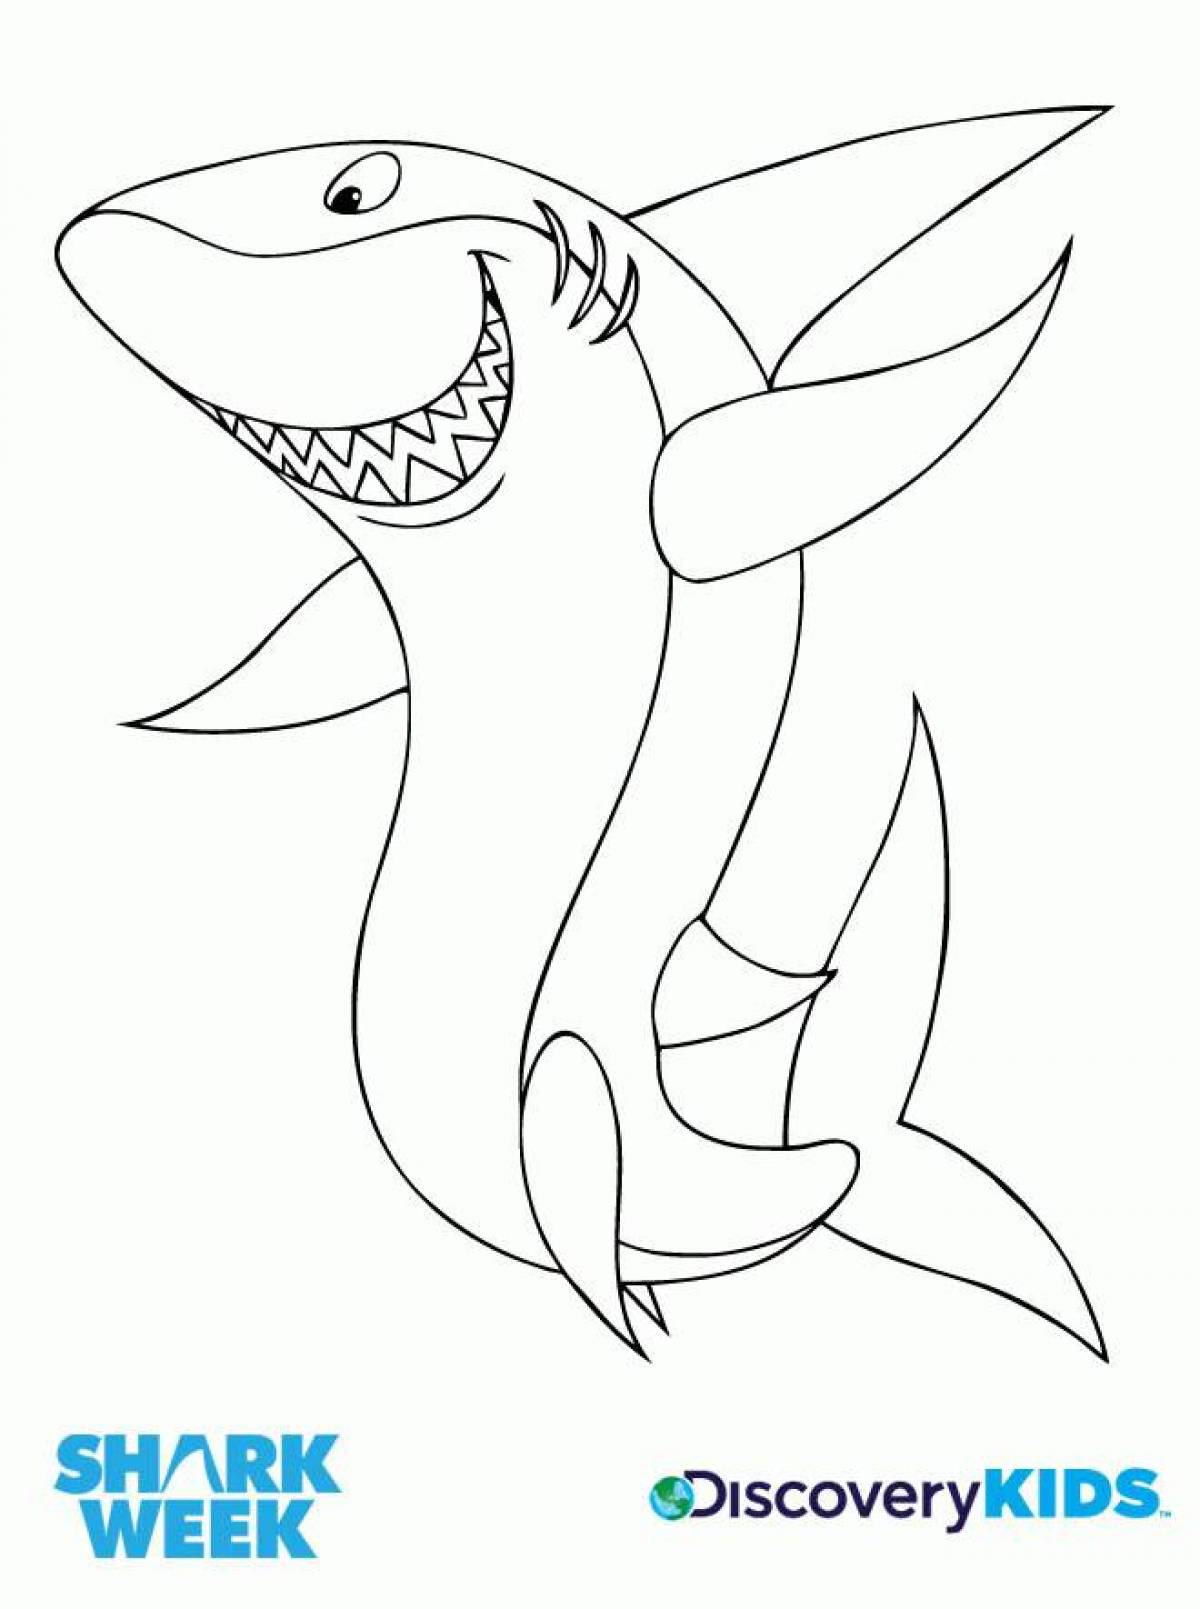 Fancy shark coloring page